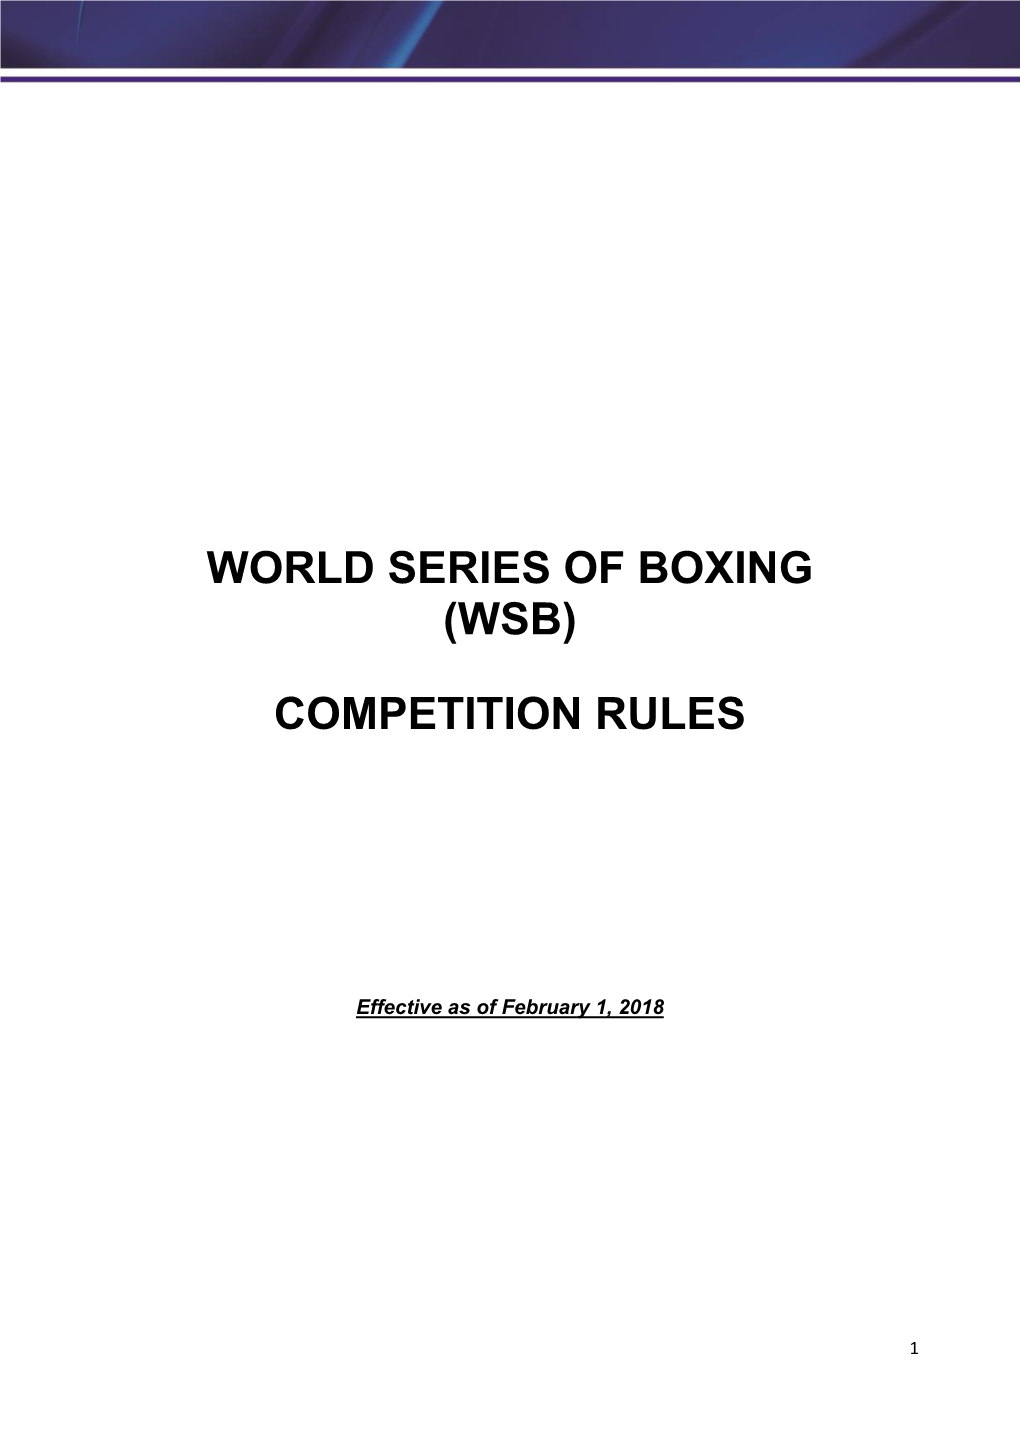 (WSB) Competition Rules